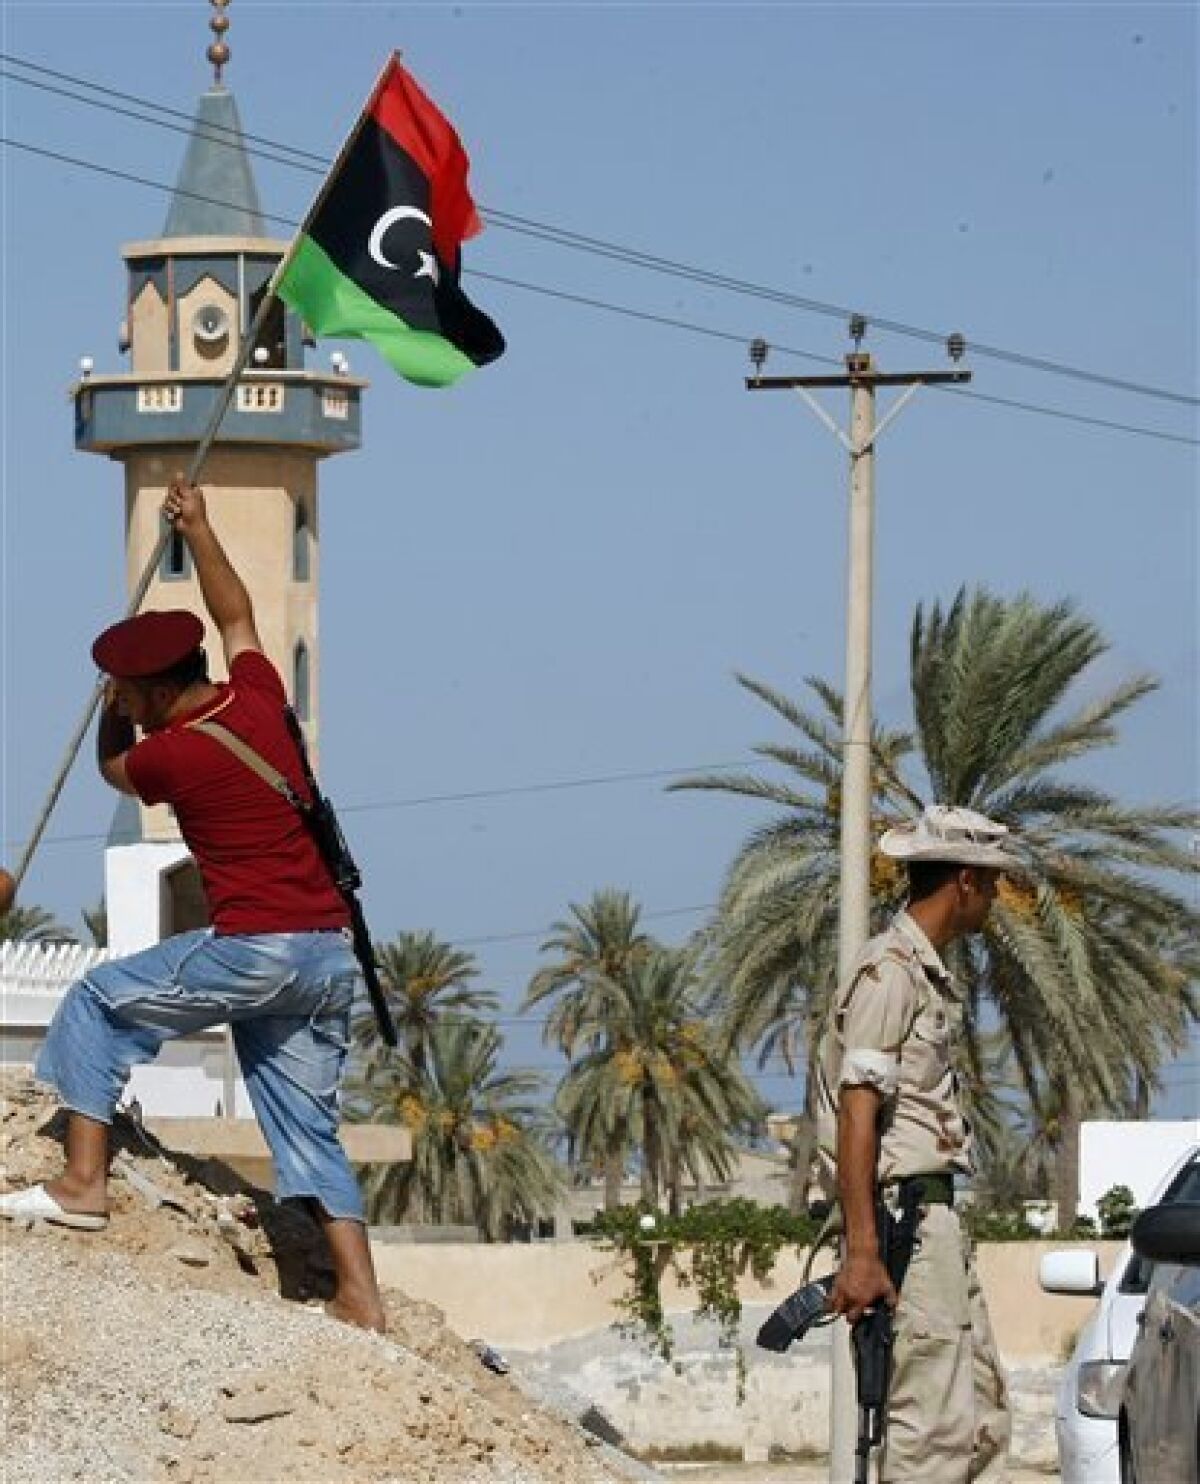 Libyan fighter plants the Libya's flag of the former rebels at a check point in Al Ajaylat, 120 km west of Tripoli, Libya, Wednesday, Sept. 7, 2011. The new colours of the flag decorate a lot of streets and buildings after the six-month civil war that ended Gadhafi's 42-year rule and sent him into hiding. (AP Photo/Francois Mori)